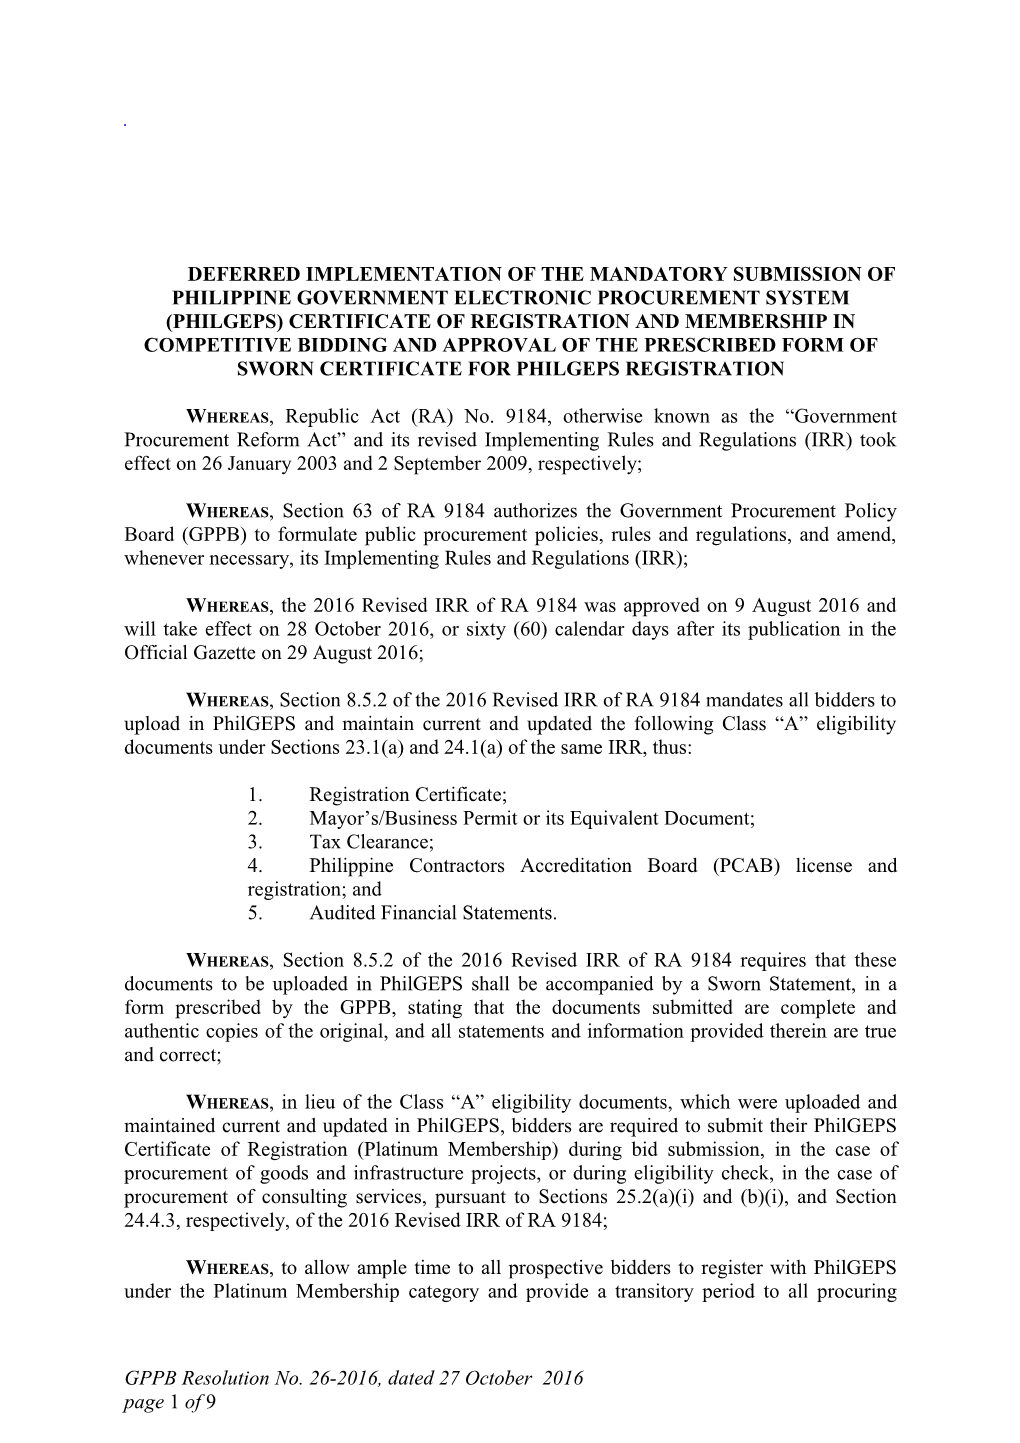 Deferred Implementation of the Mandatory Submission of Philippine Government Electronic